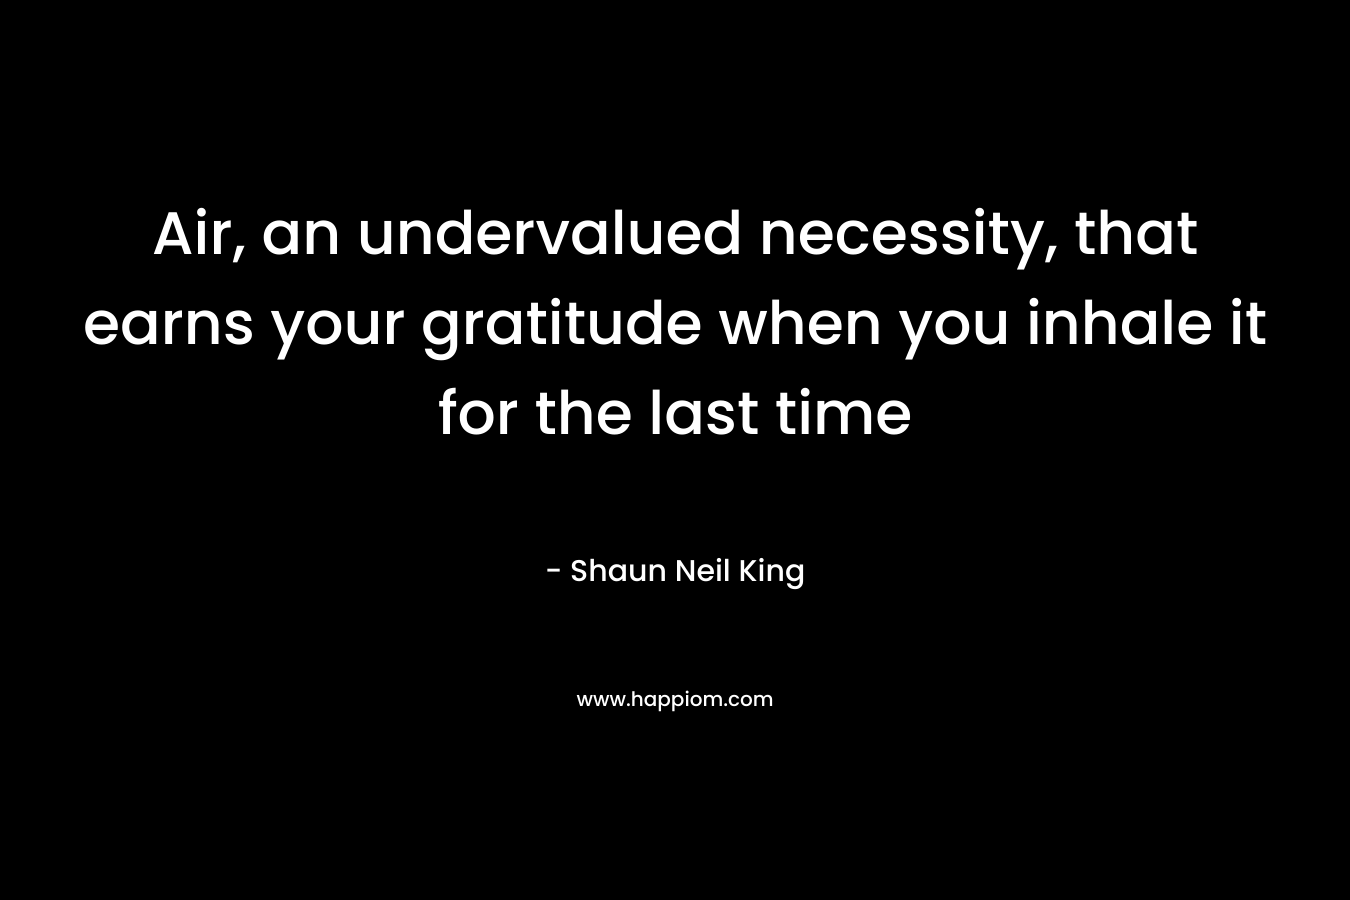 Air, an undervalued necessity, that earns your gratitude when you inhale it for the last time – Shaun Neil King